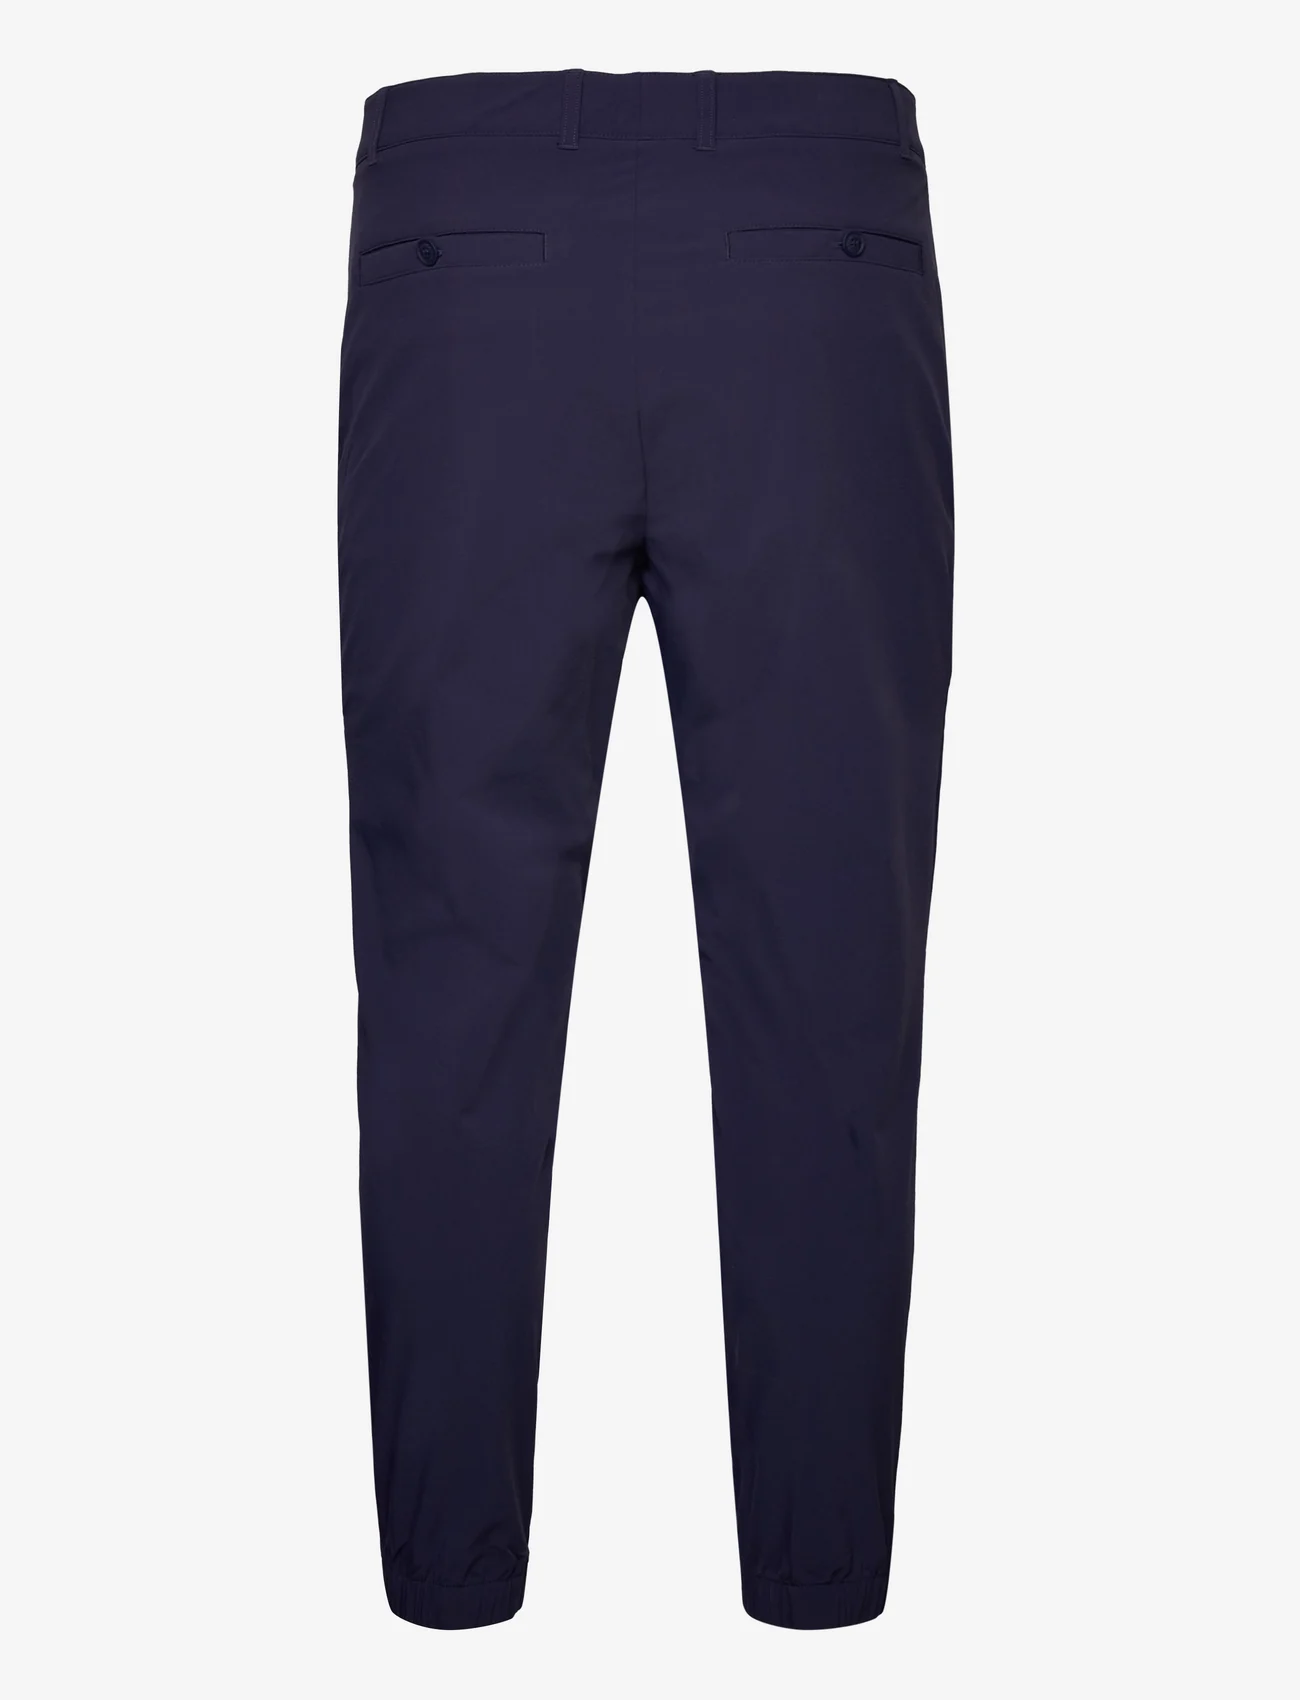 Lacoste - TROUSERS - golfbyxor - navy blue - 1